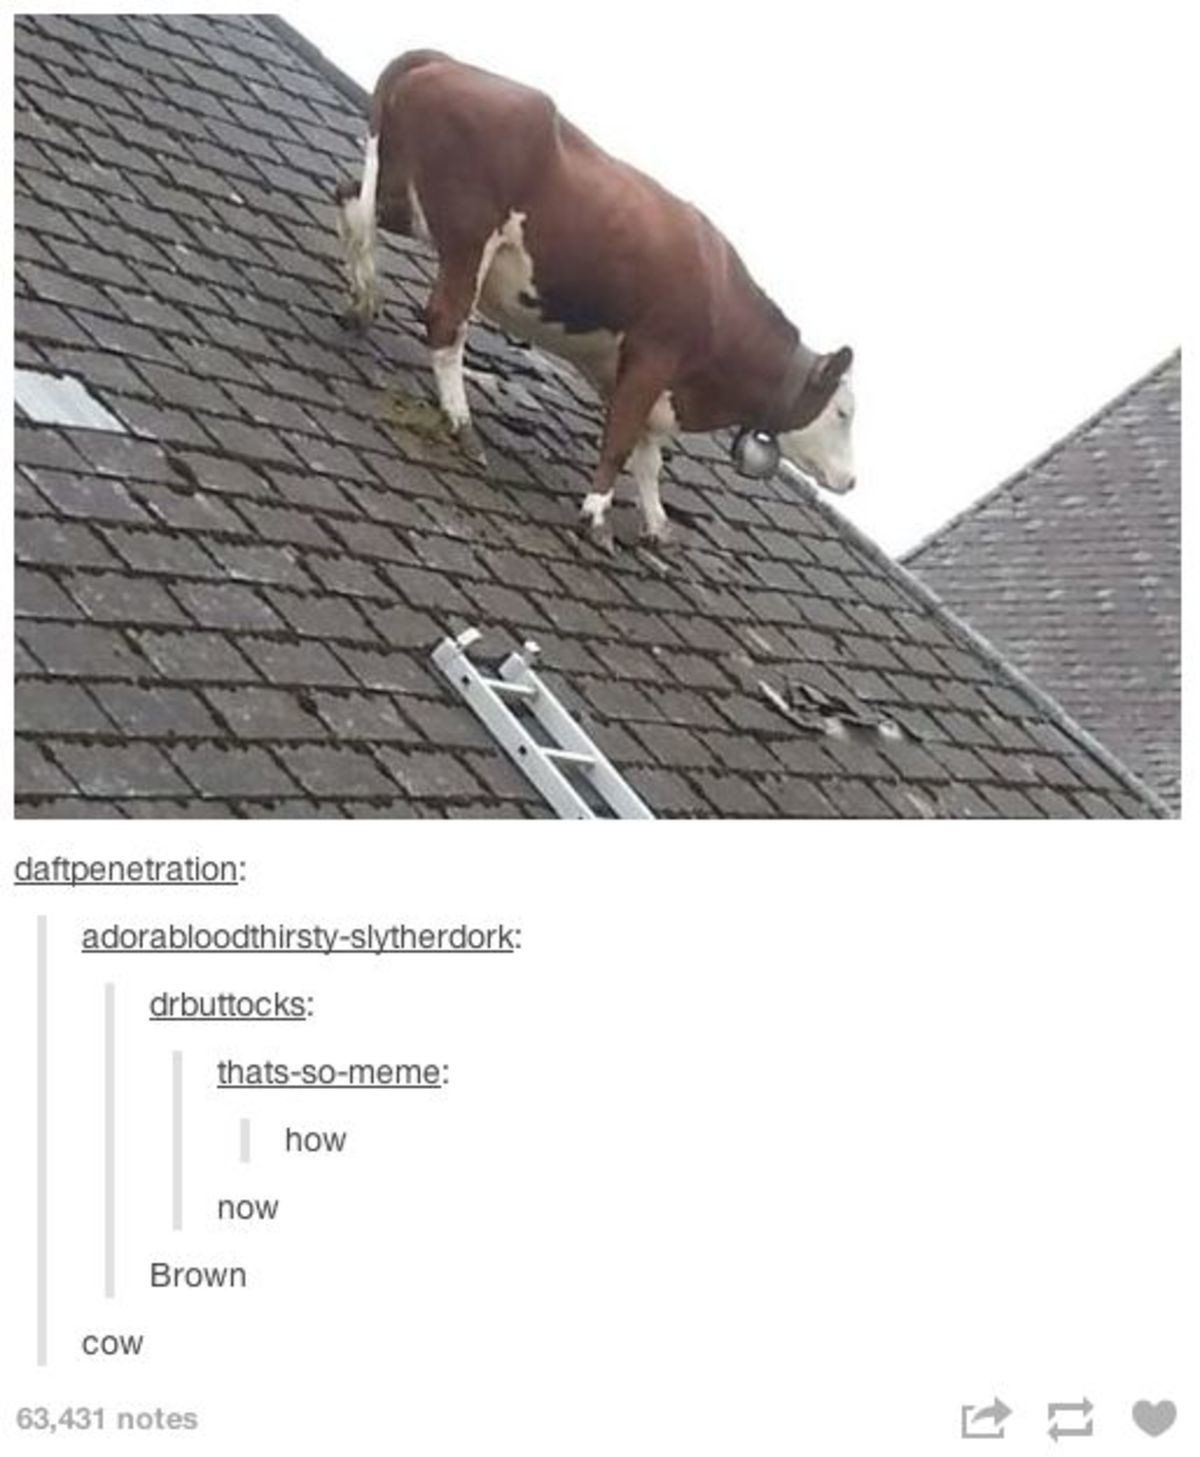 How. . t: ' titration: how new Brown COW 63. 4131 notes tta. That's a darn cow on a roof